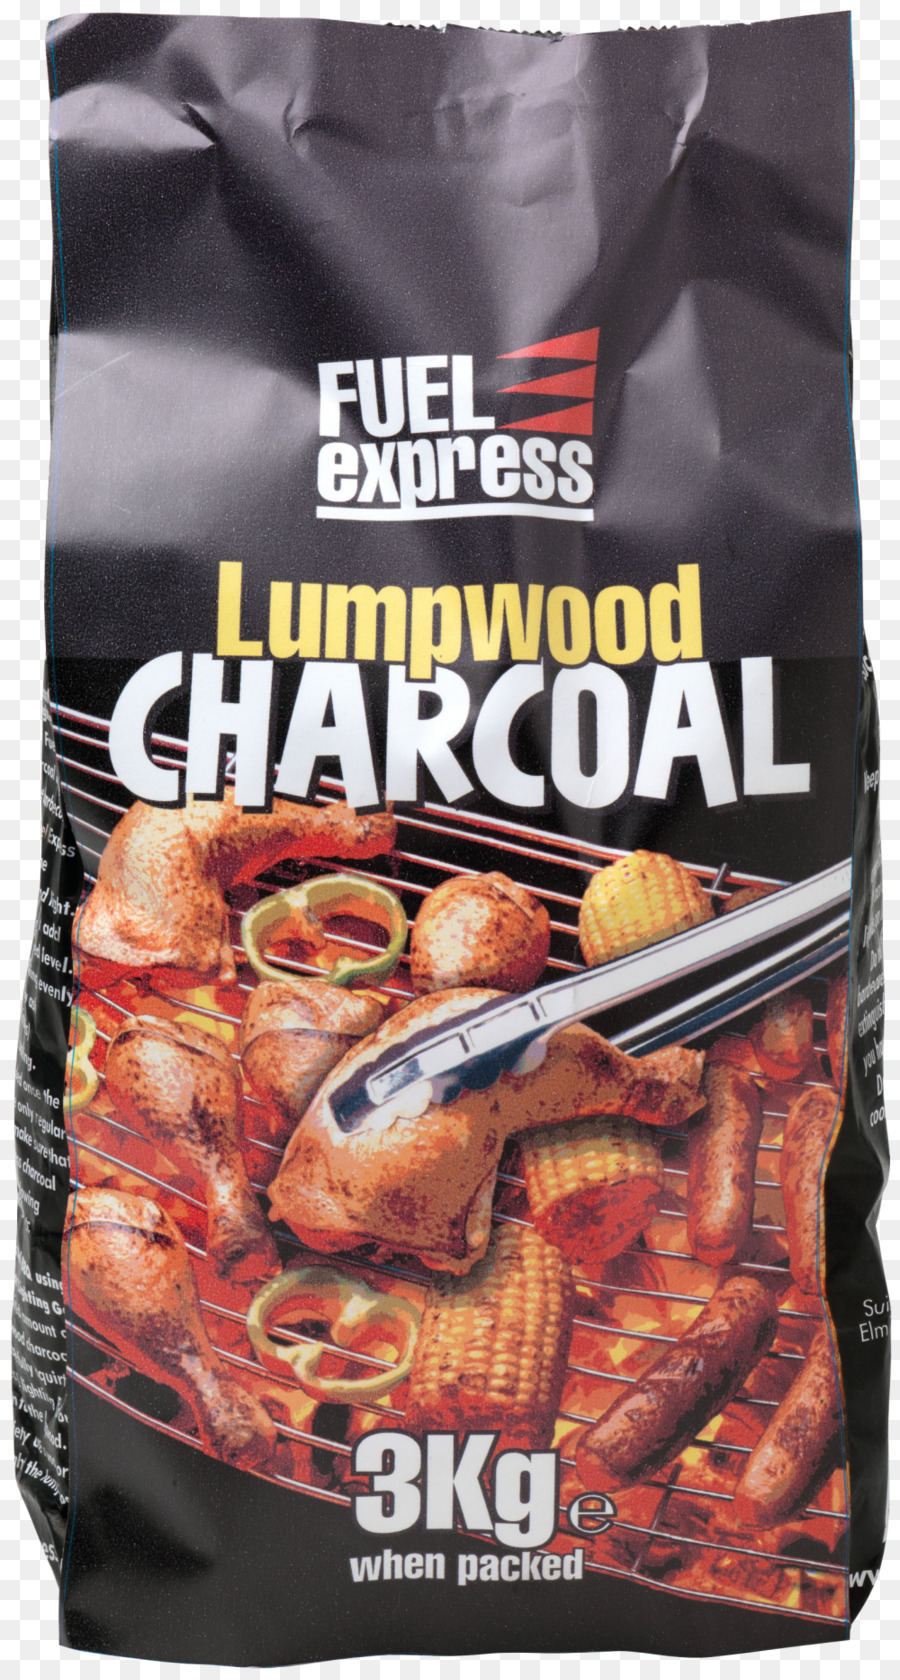 Charcoal Grilling